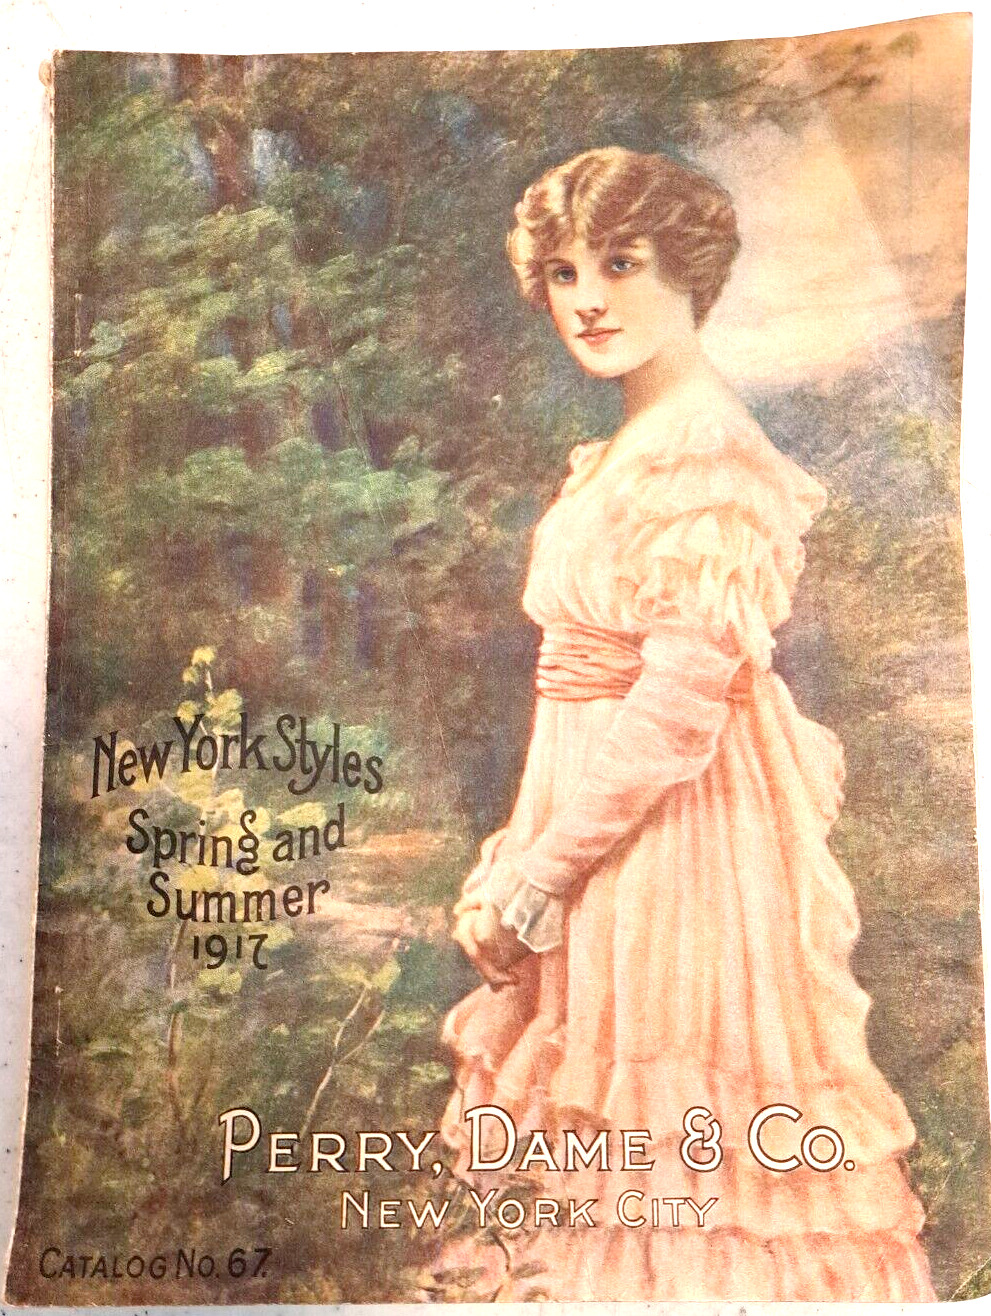 Perry Dame & Co New York Styles Spring & Summer 1917 Catalog Ladies Fashion